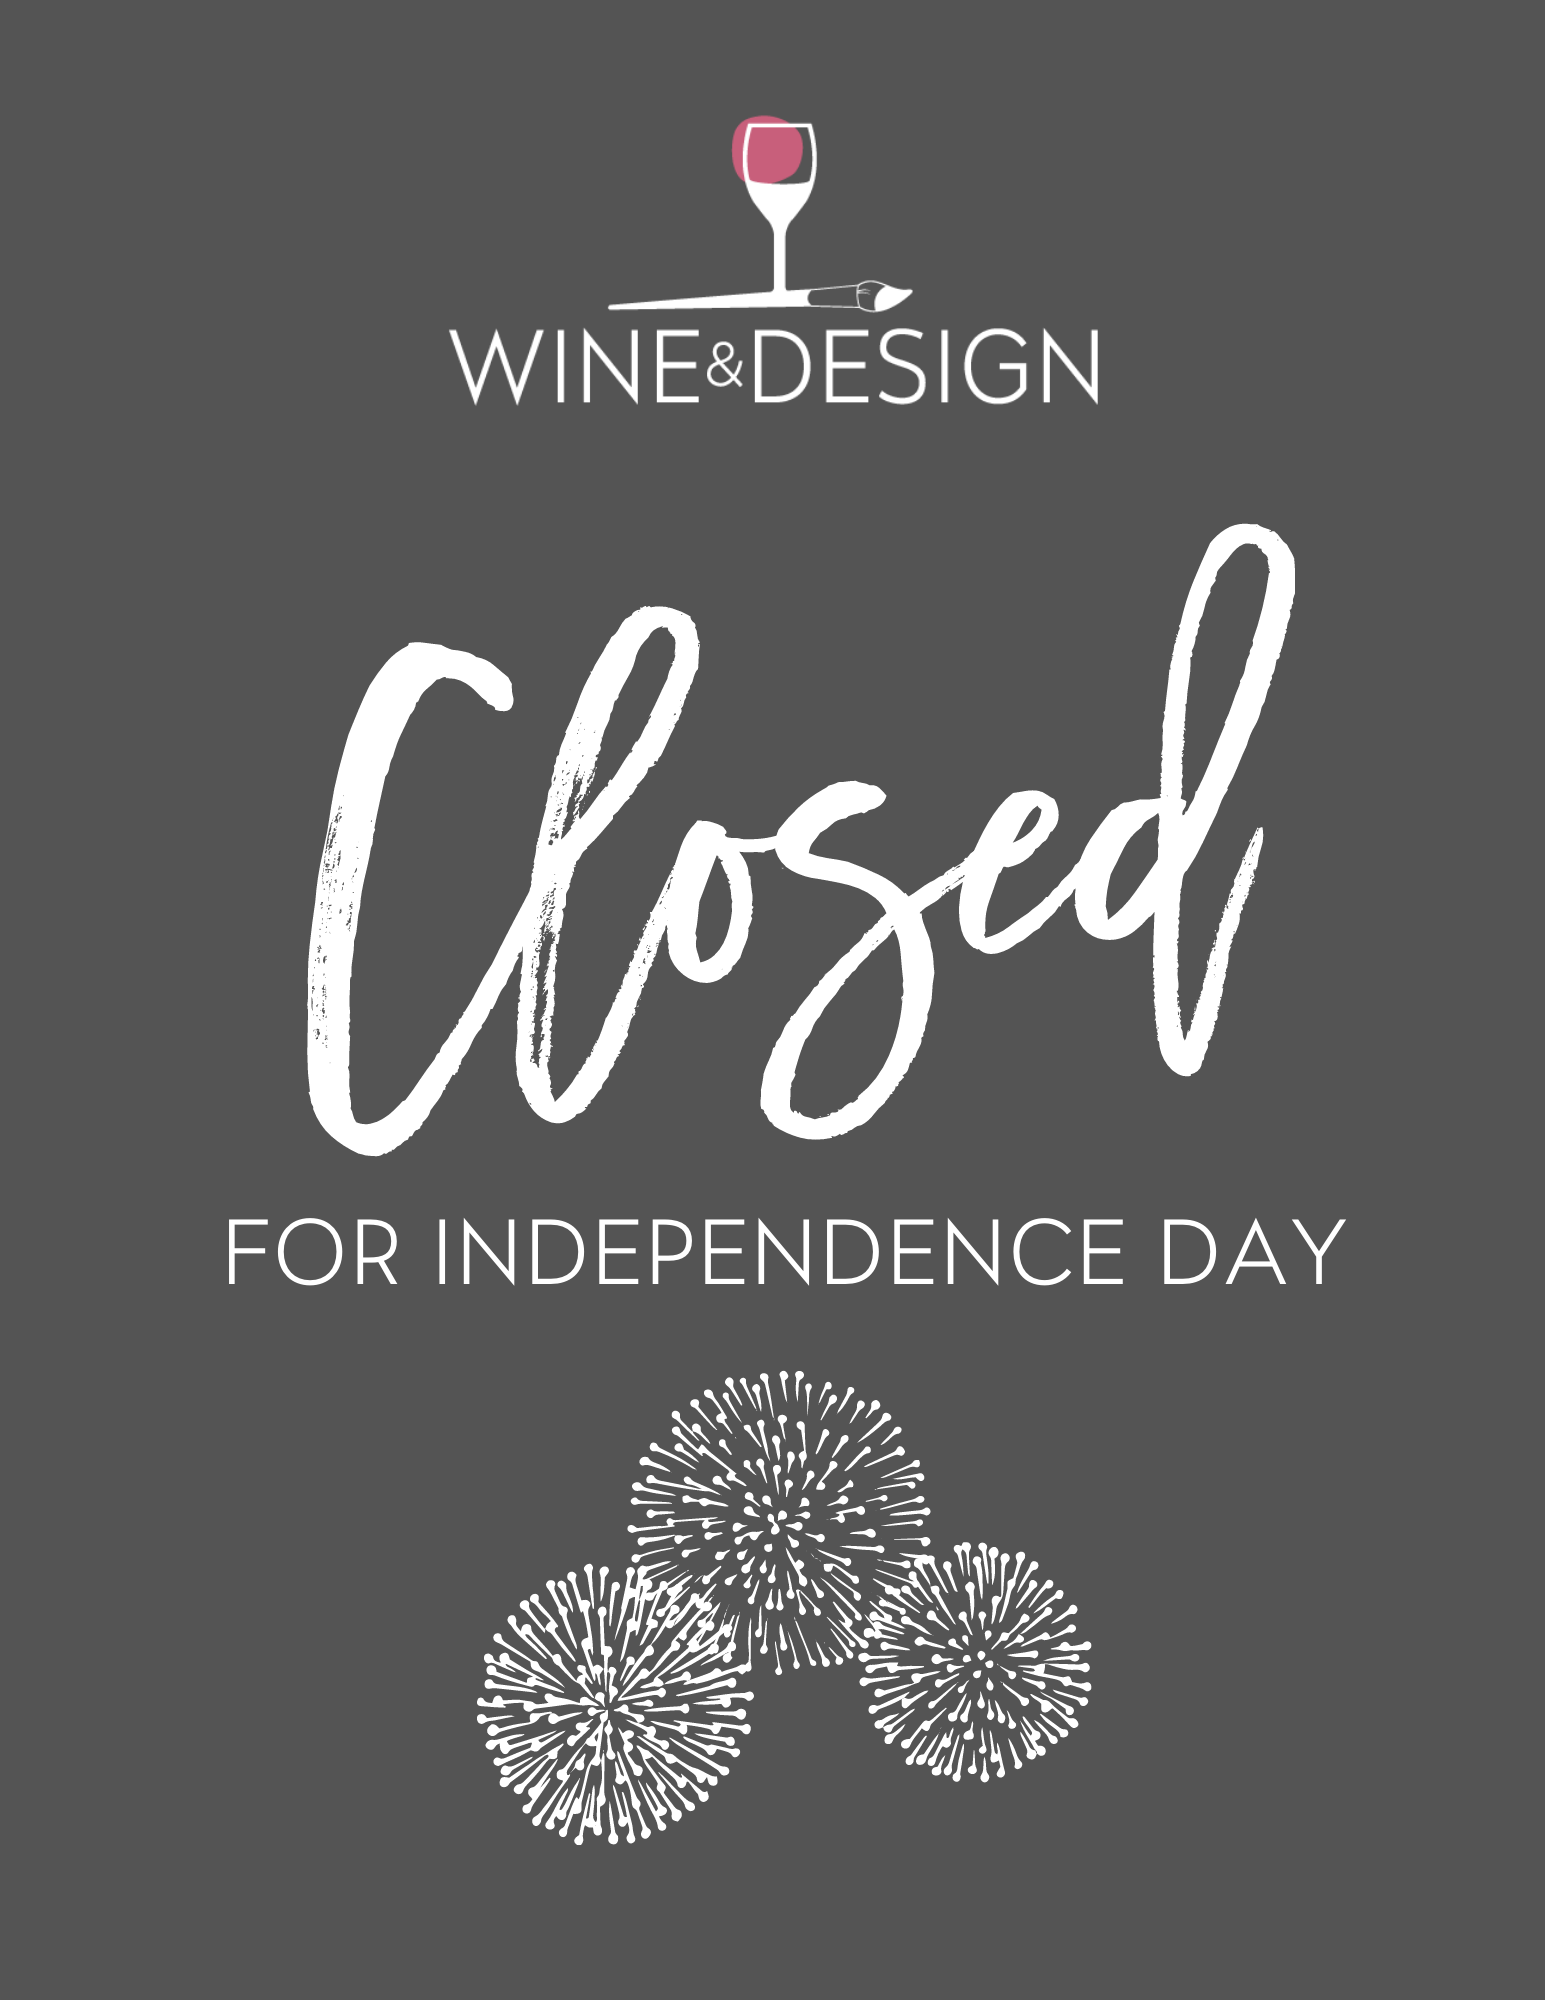 Studio Closed for Independence Day